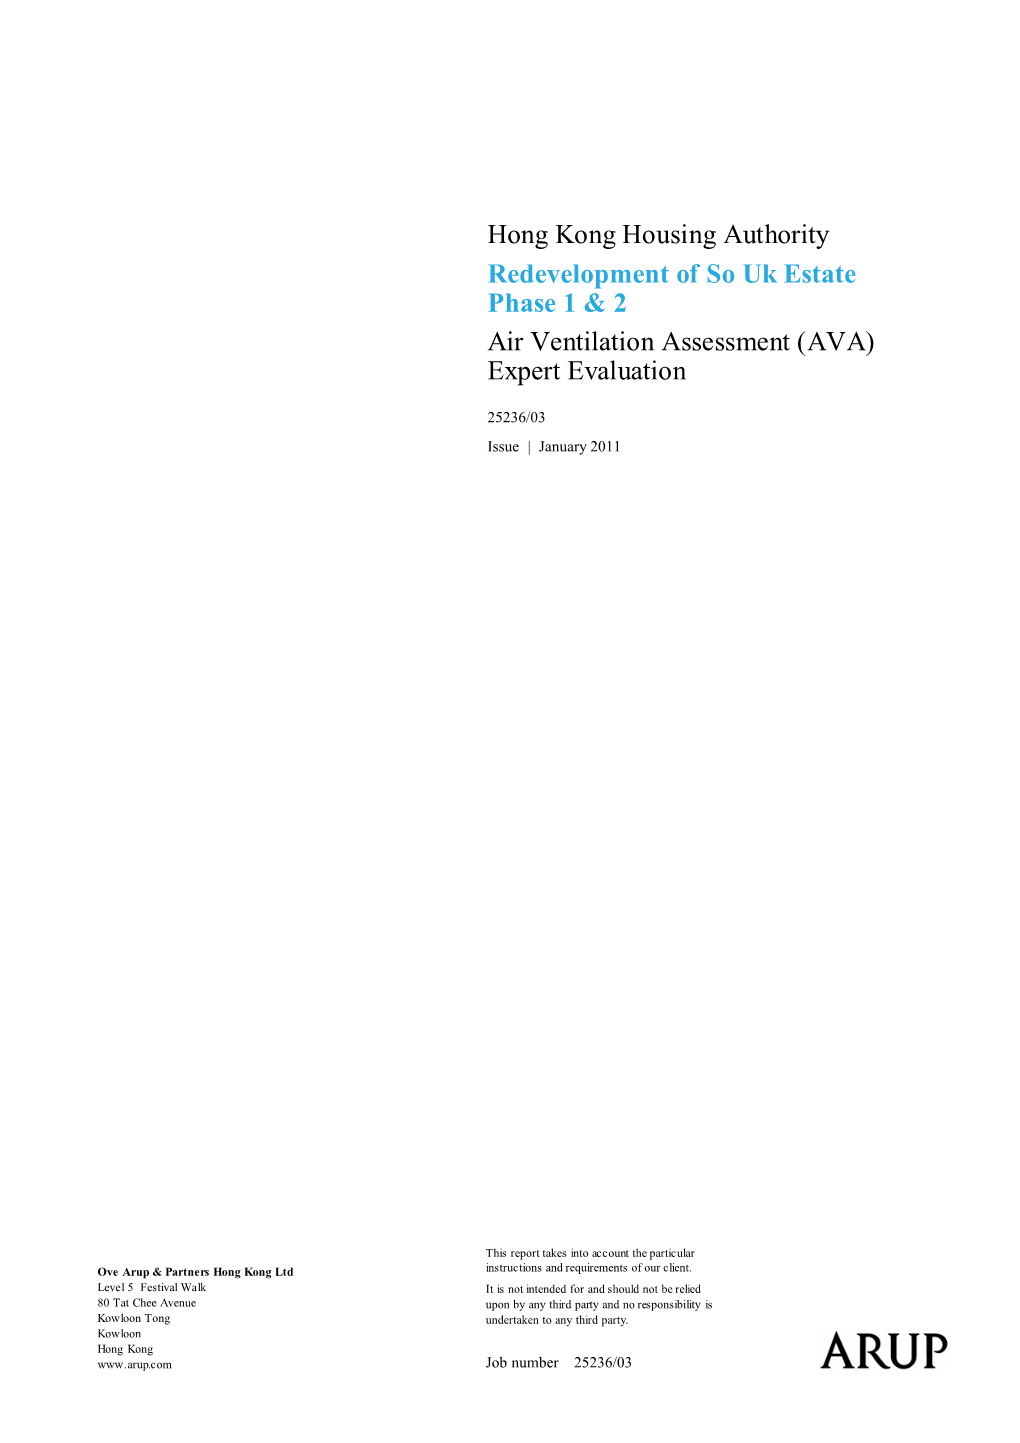 Hong Kong Housing Authority Redevelopment of So Uk Estate Phase 1 & 2 Air Ventilation Assessment (AVA) Expert Evaluation